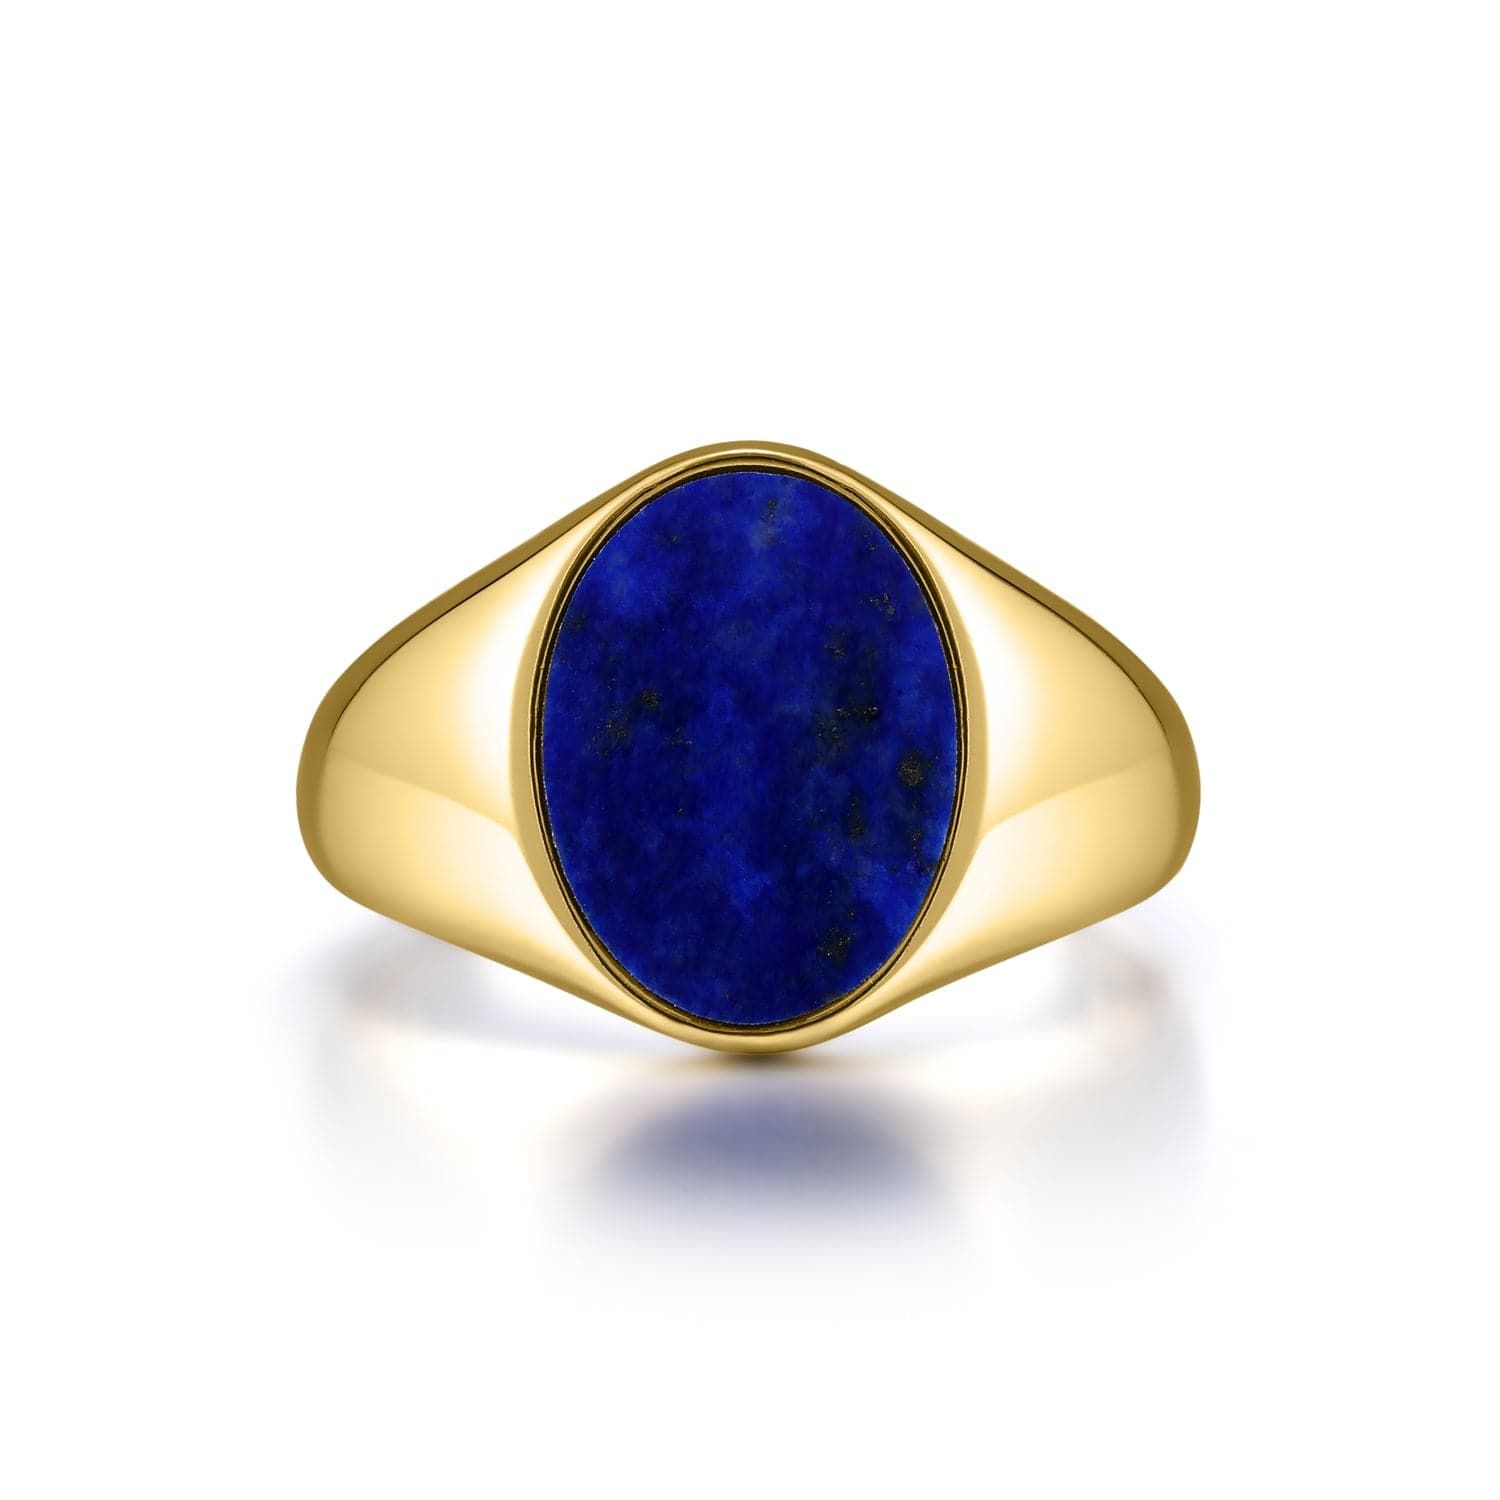 a yellow gold ring with a blue stone